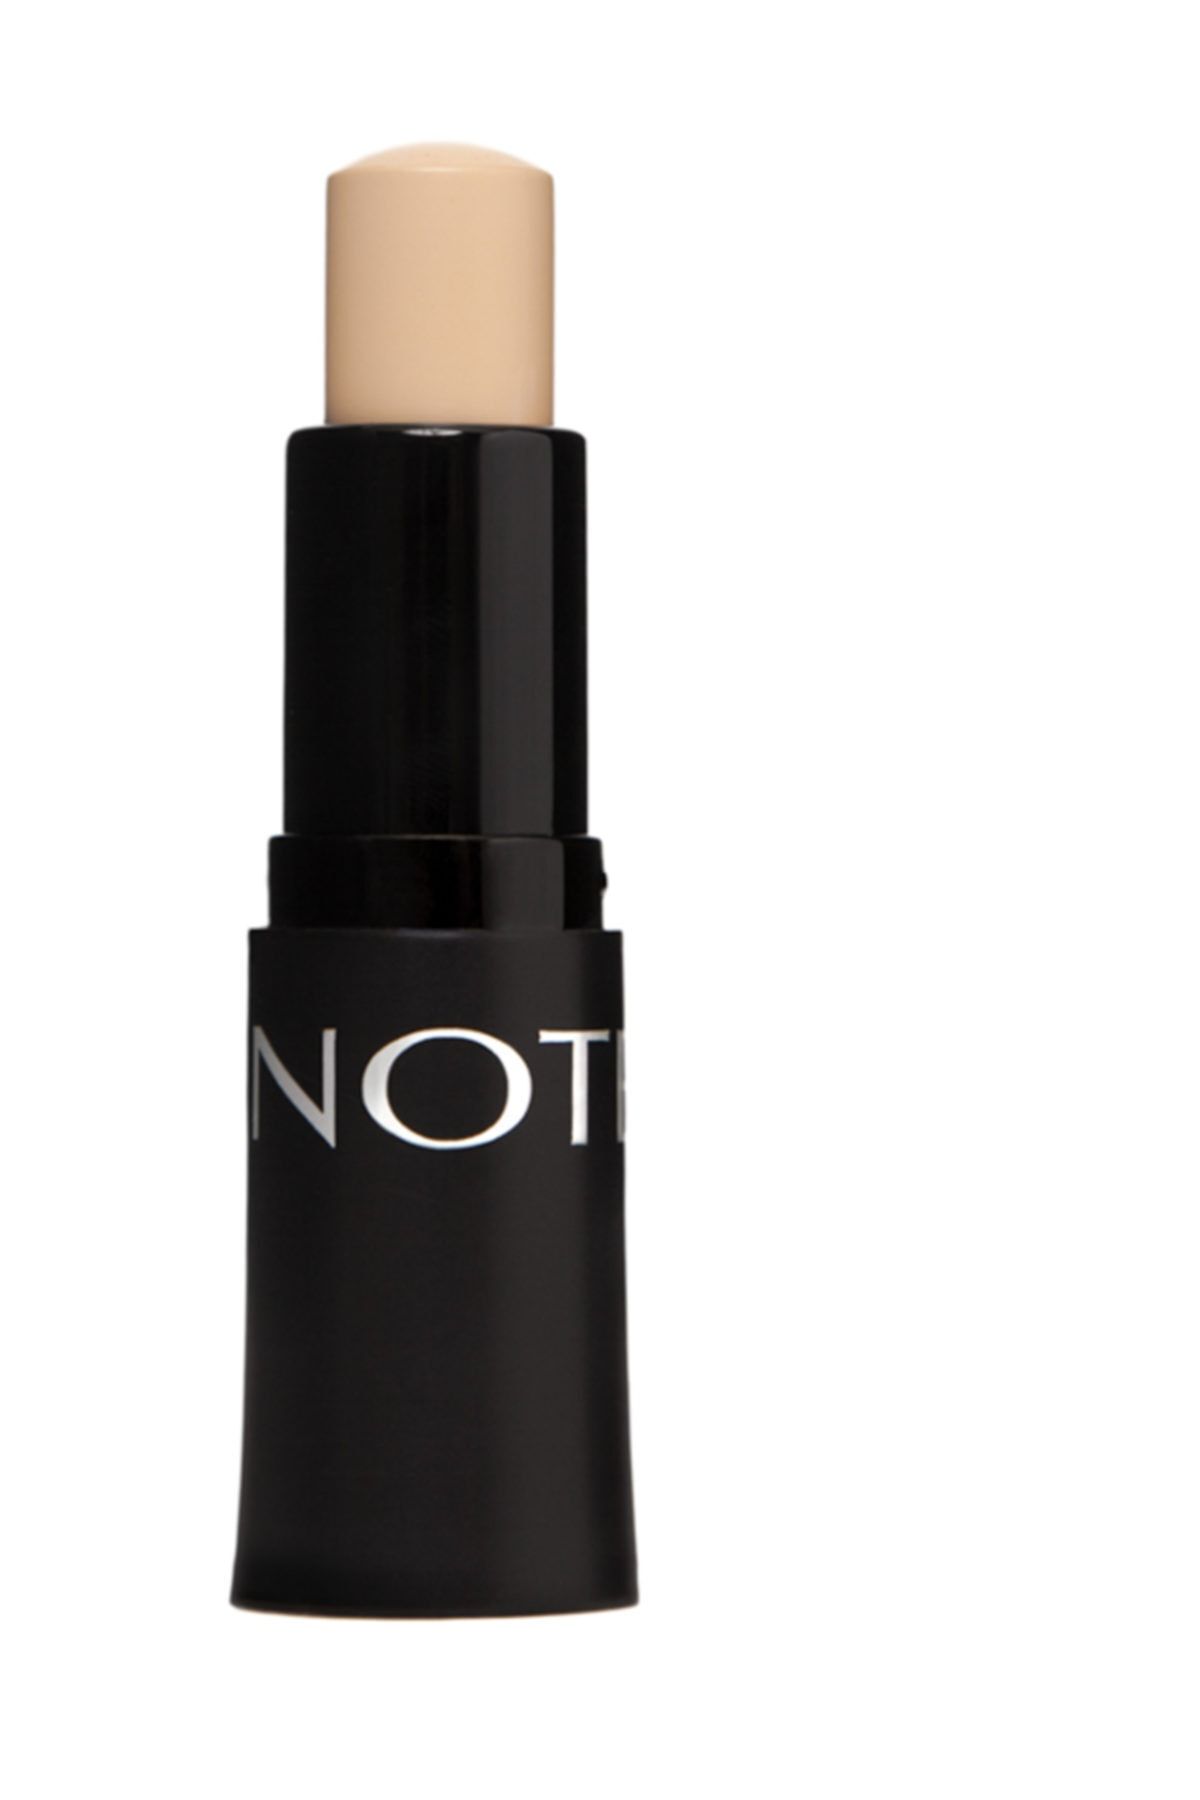 Note Cosmetics Full Coverage Stıck Concealer 01